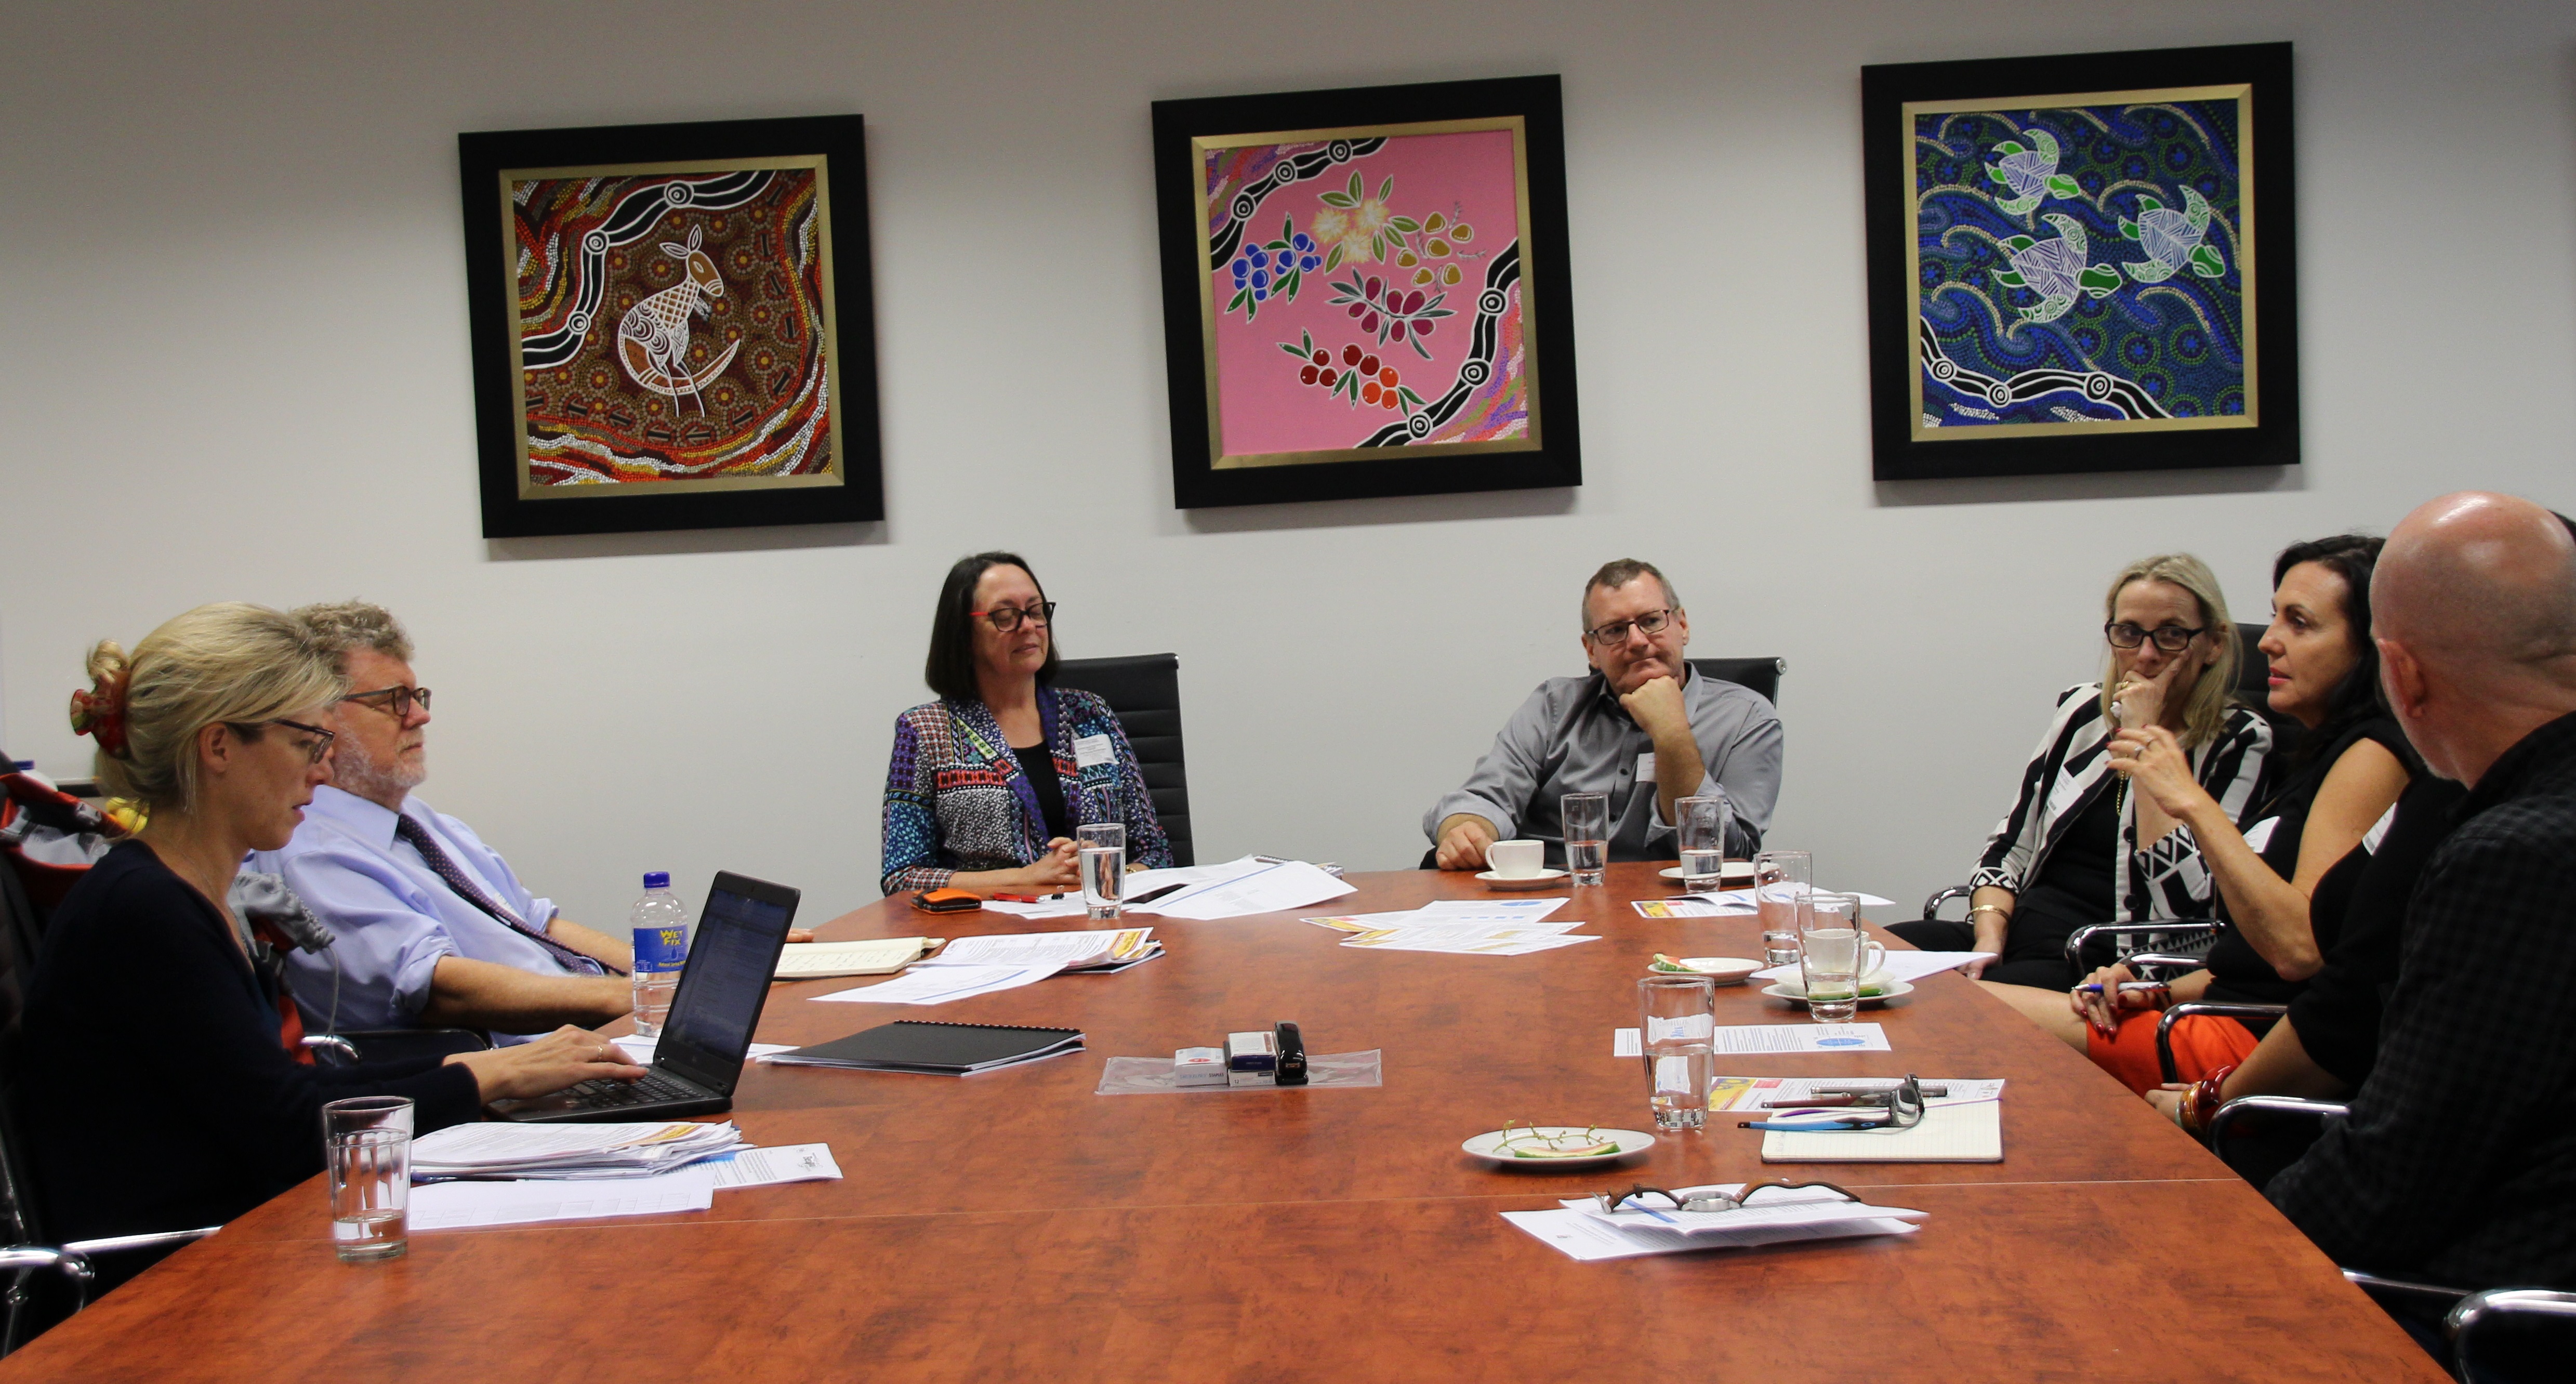 Professional staff from Griffith and OECD around a boardroom table in discussion